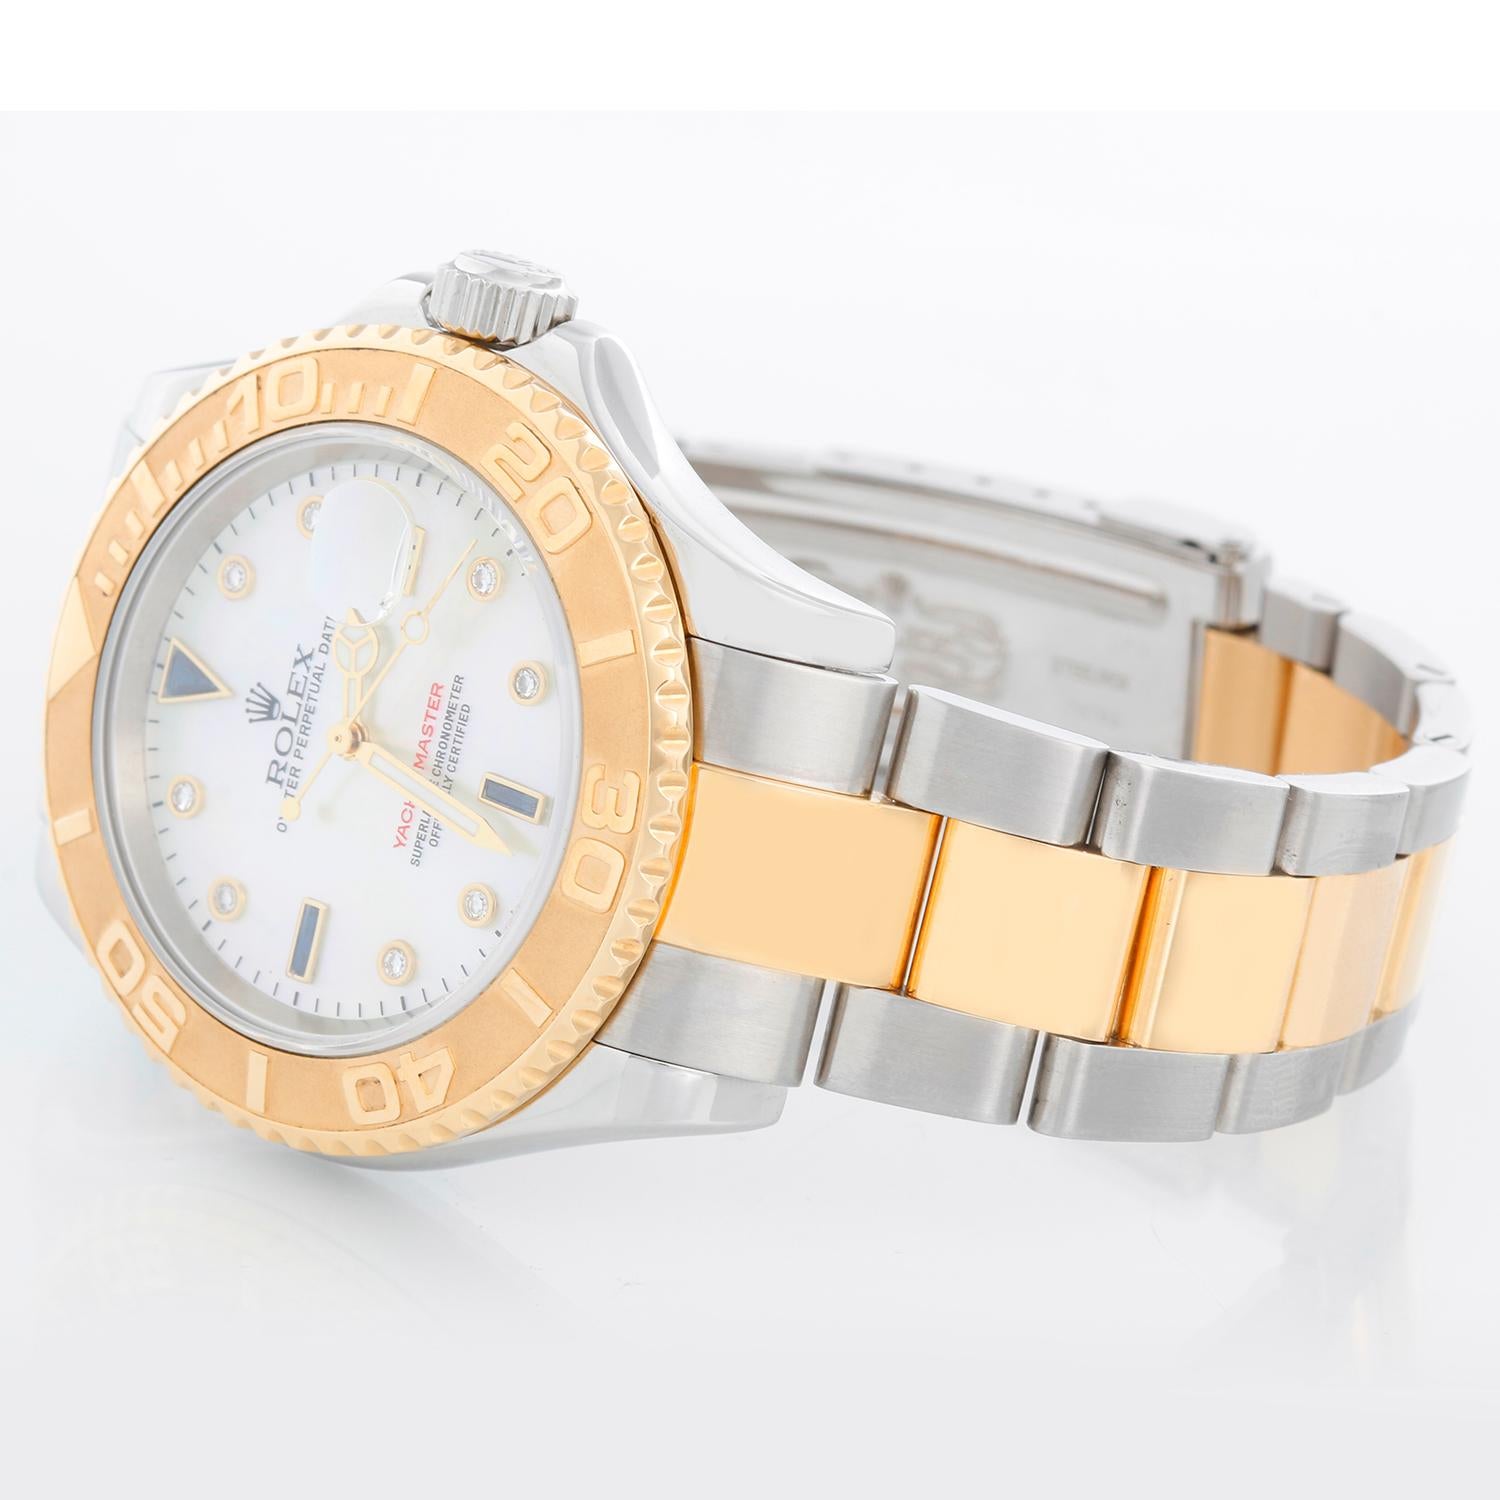 Rolex Yacht-Master Steel & Gold Men's 2-Tone Watch 16623 - Automatic winding, 31 jewels, Quickset, sapphire crystal. Stainless steel case with 18k yellow gold bezel  (40mm diameter). Mother of Pearl Sapphire dial . Stainless steel and 18k yellow